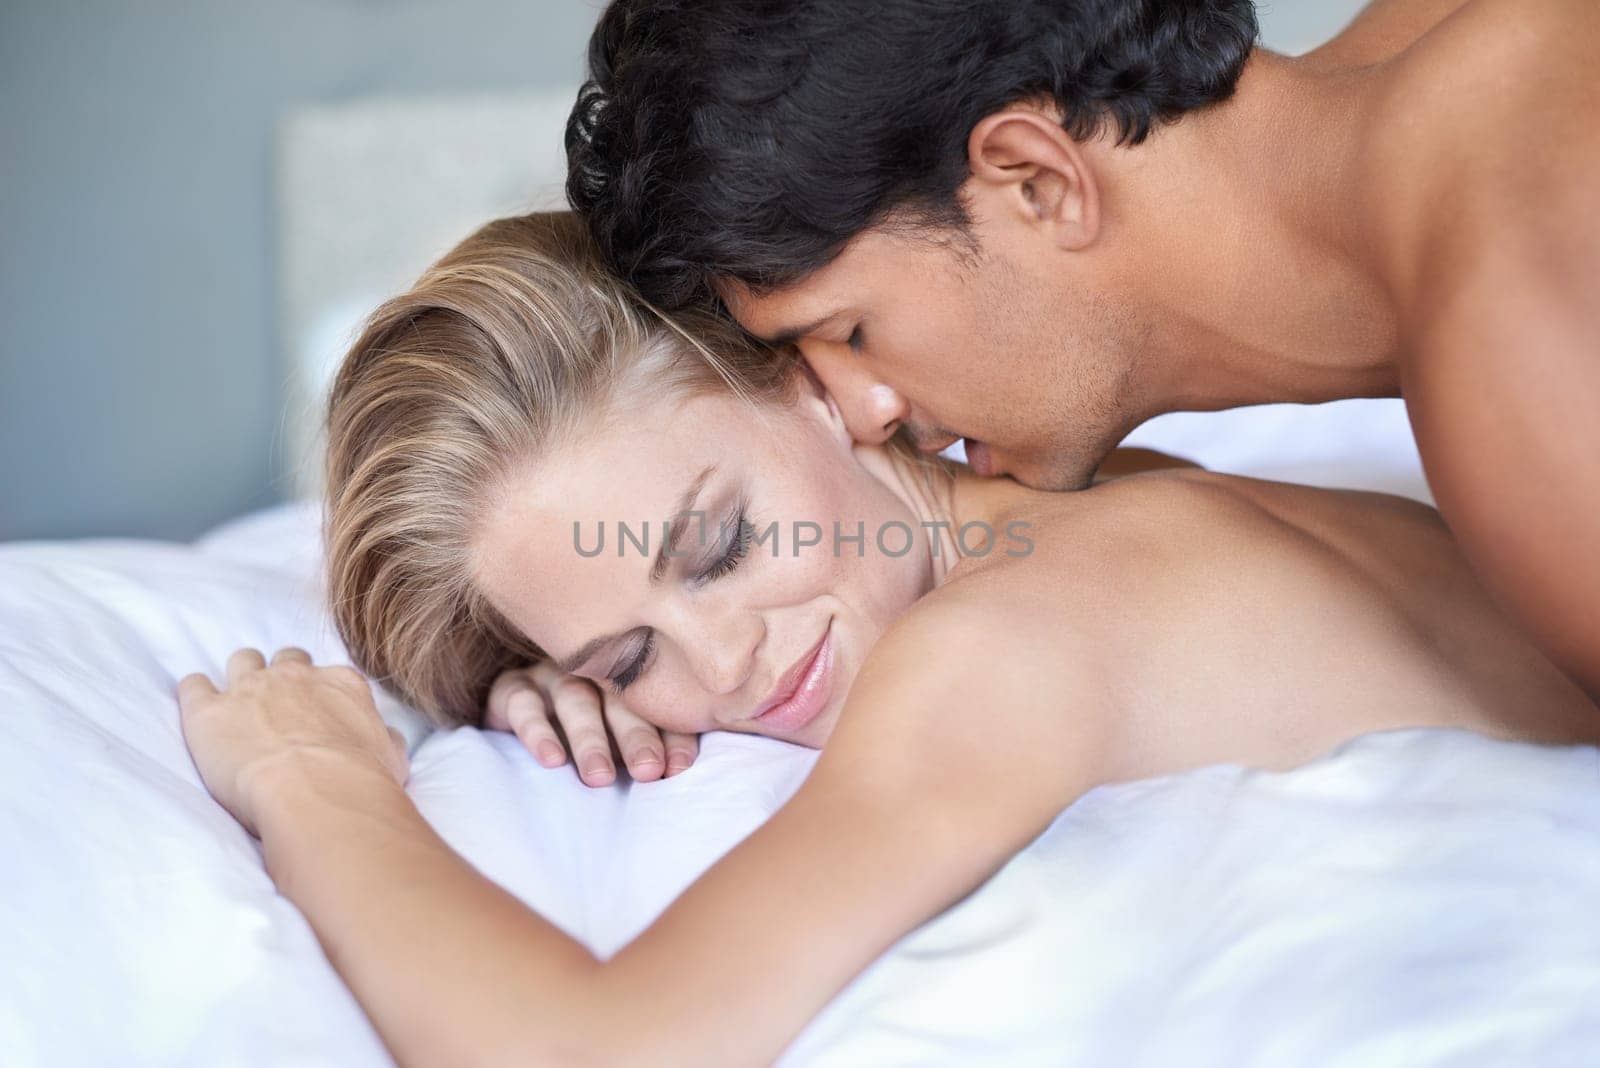 The best way to be woken up. A handsome young man kissing his girlfriend on her bare back